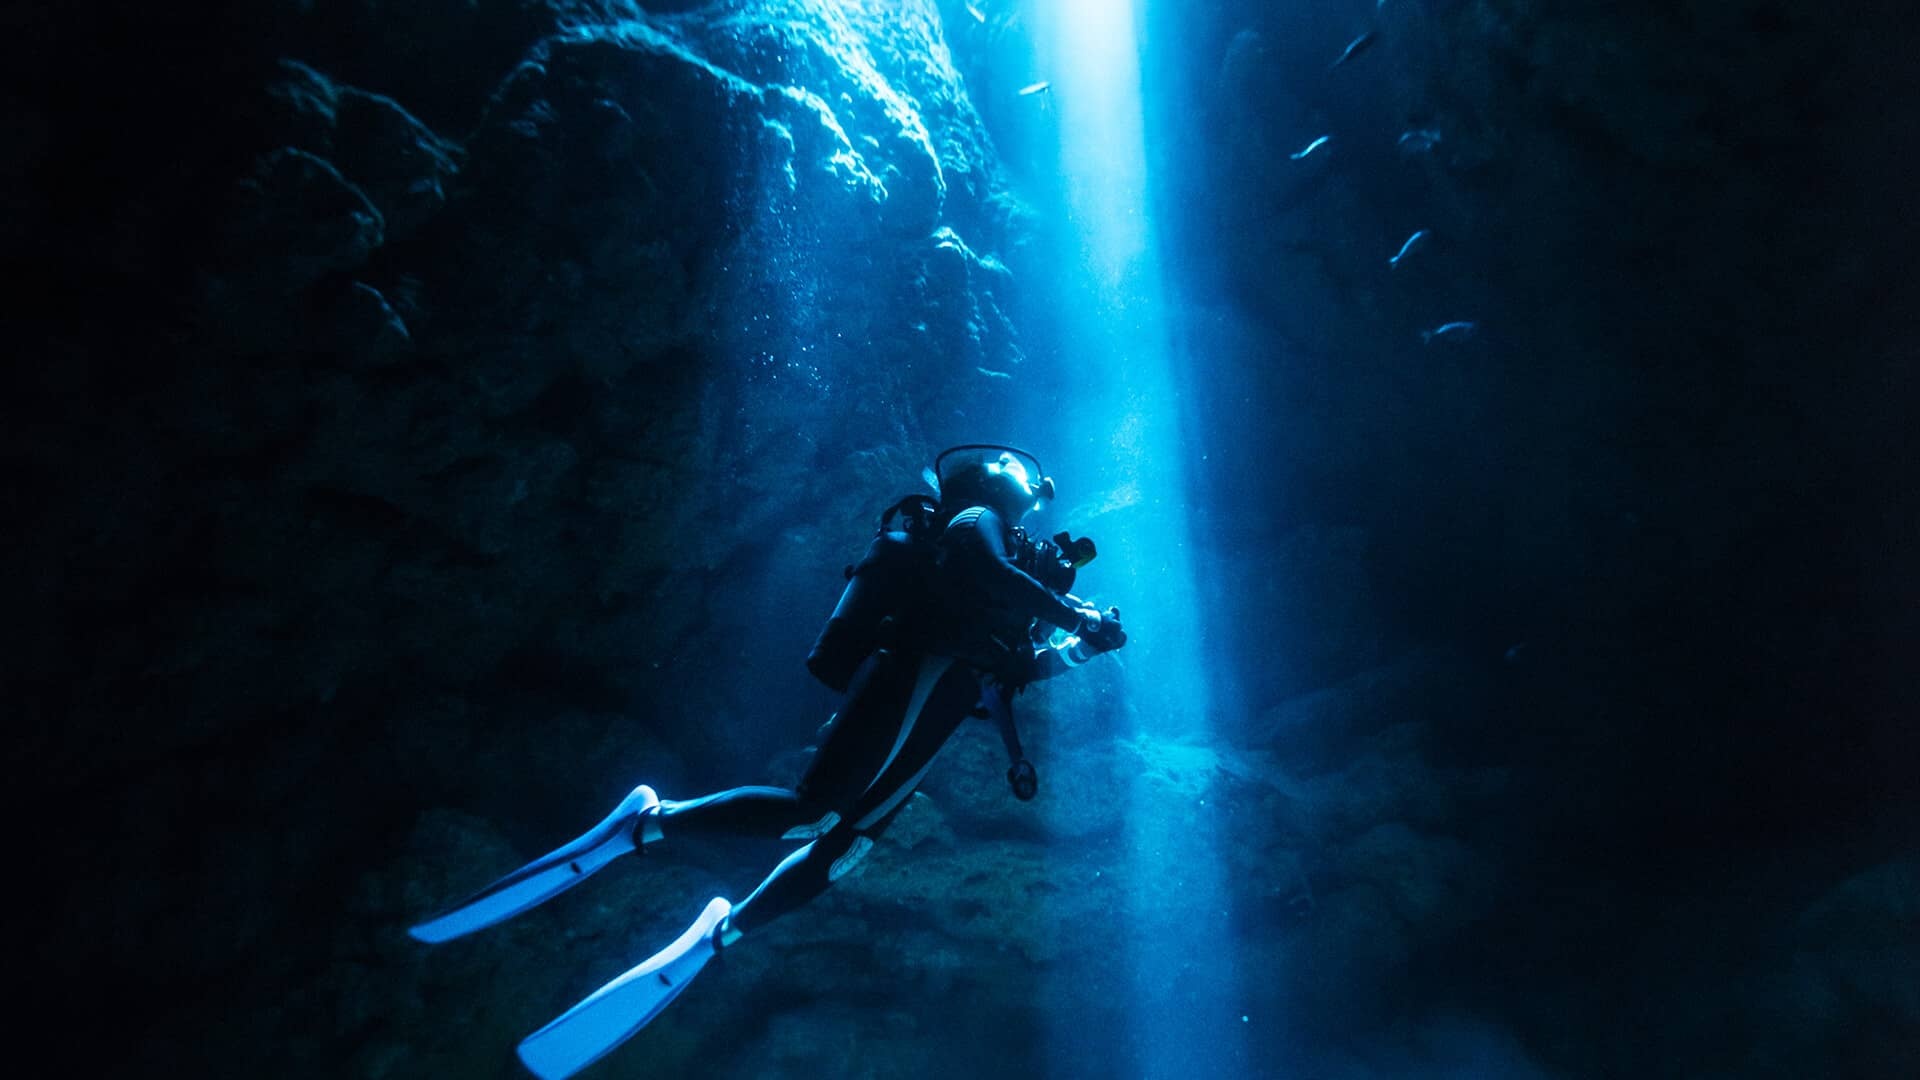 Scuba Diving: Exploring the flooded caves - one of the most dangerous underwater activities in the world. 1920x1080 Full HD Wallpaper.